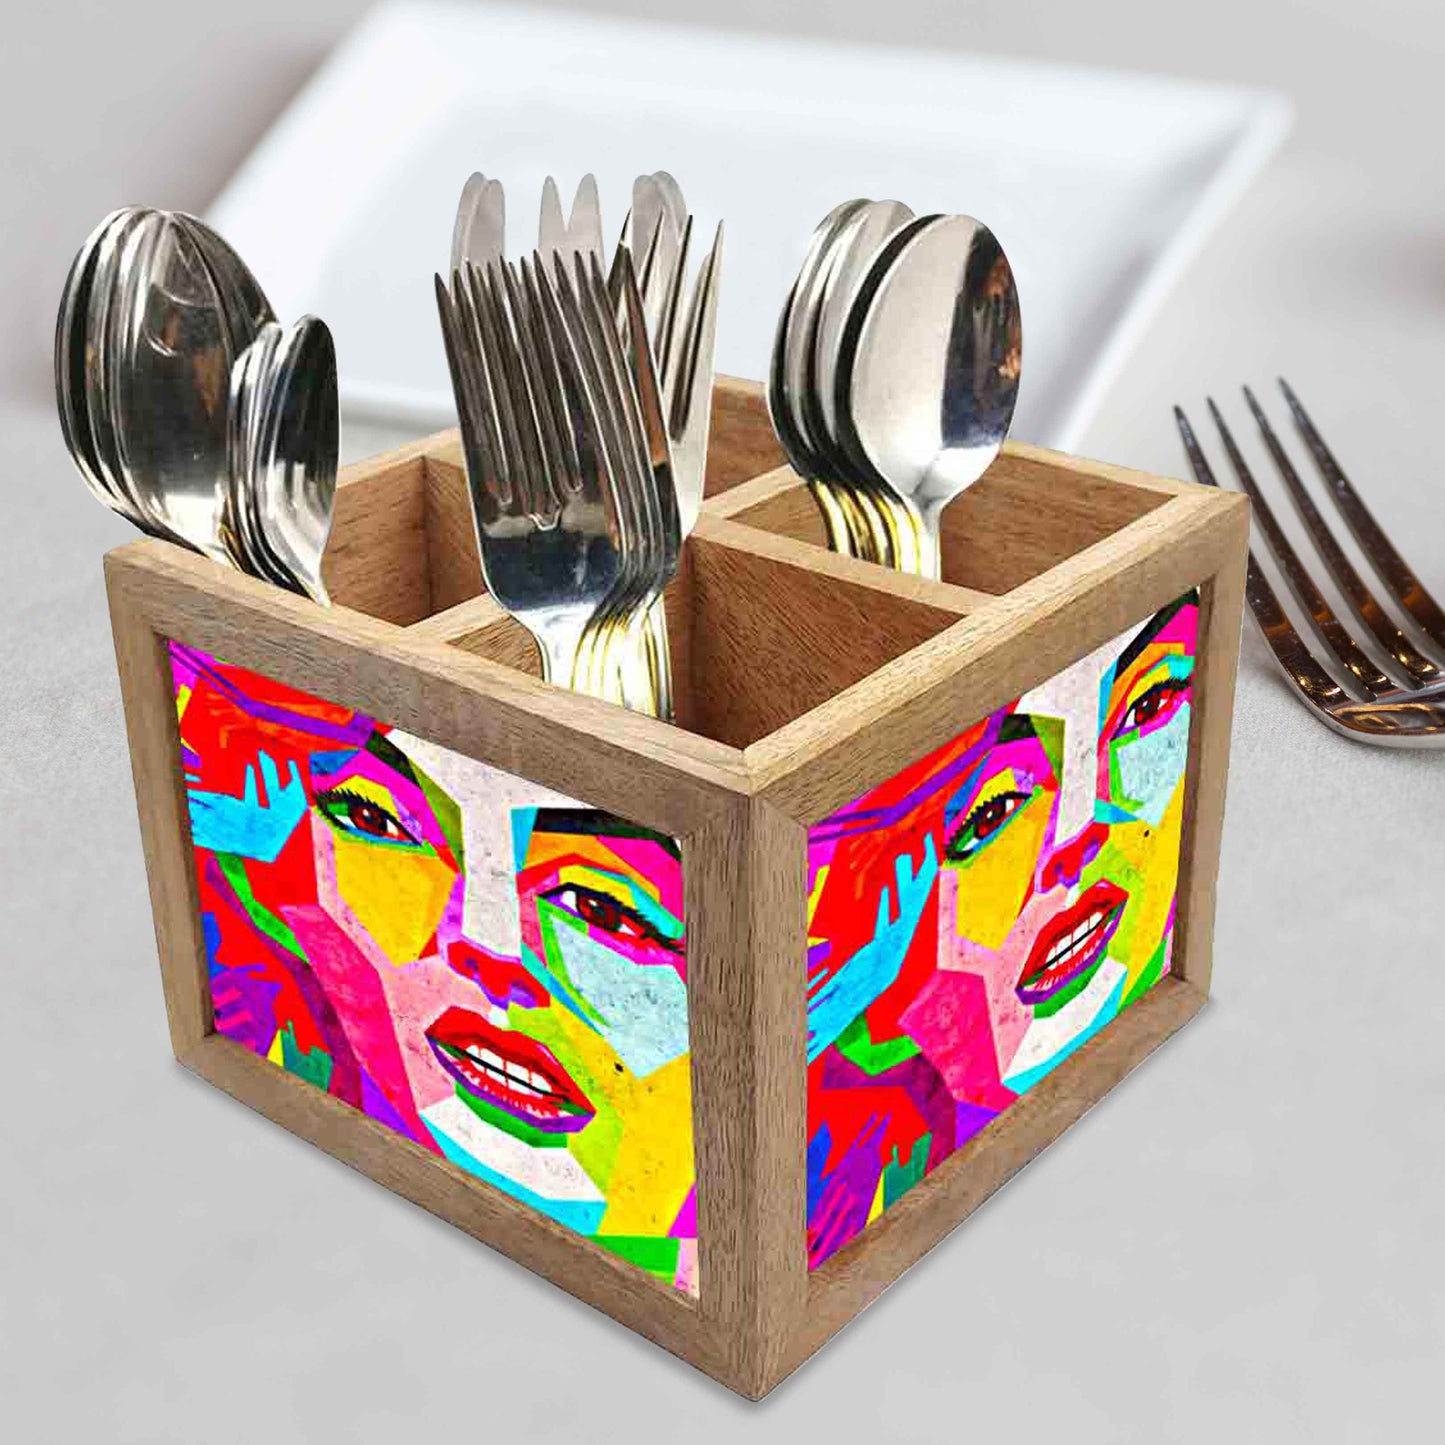 Marilyn Art Cutlery Holder Stand Silverware Caddy Organizer for Spoons, Forks & Knives-Made of Pinewood